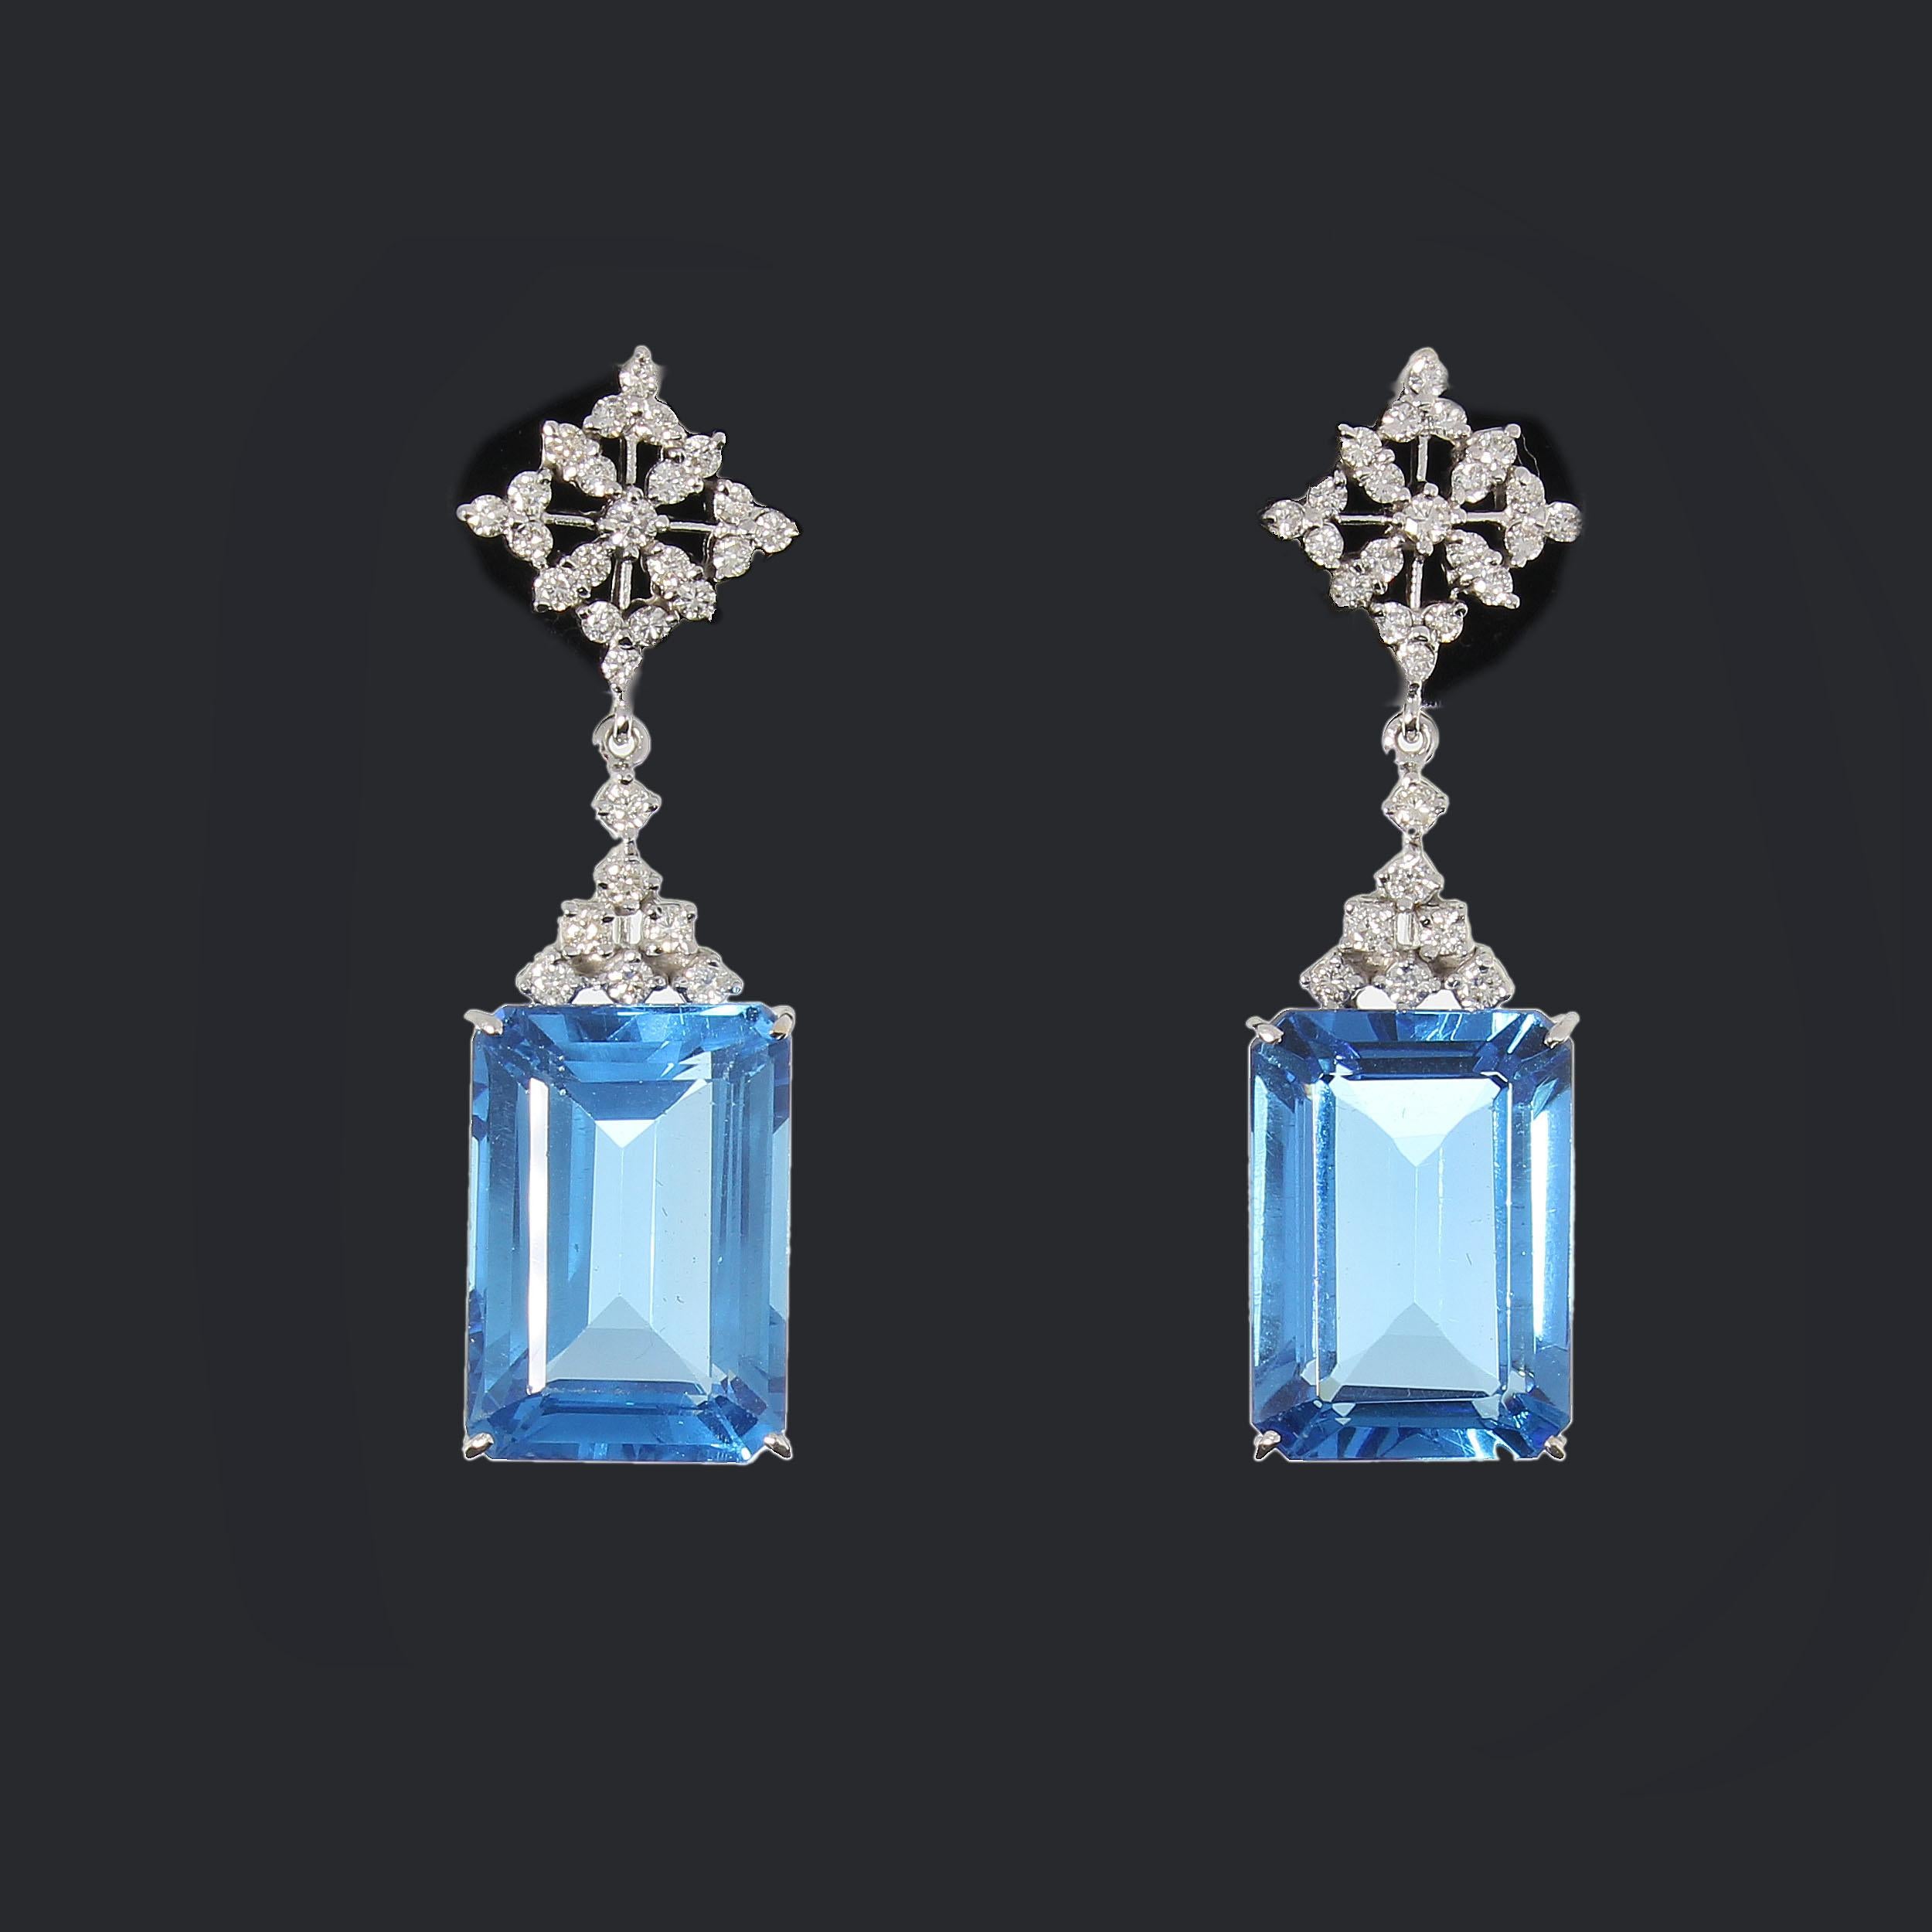 Europe about 2000. Set with 2 blue emerald-cut topaz weighing 69,0 ct. and 56 brilliant-cut diamonds weighing 1,90 ct. Prong setting. Mounted in 14 K white gold. Total weight: 20,34 g. Length: 1.97 in ( 5 cm )